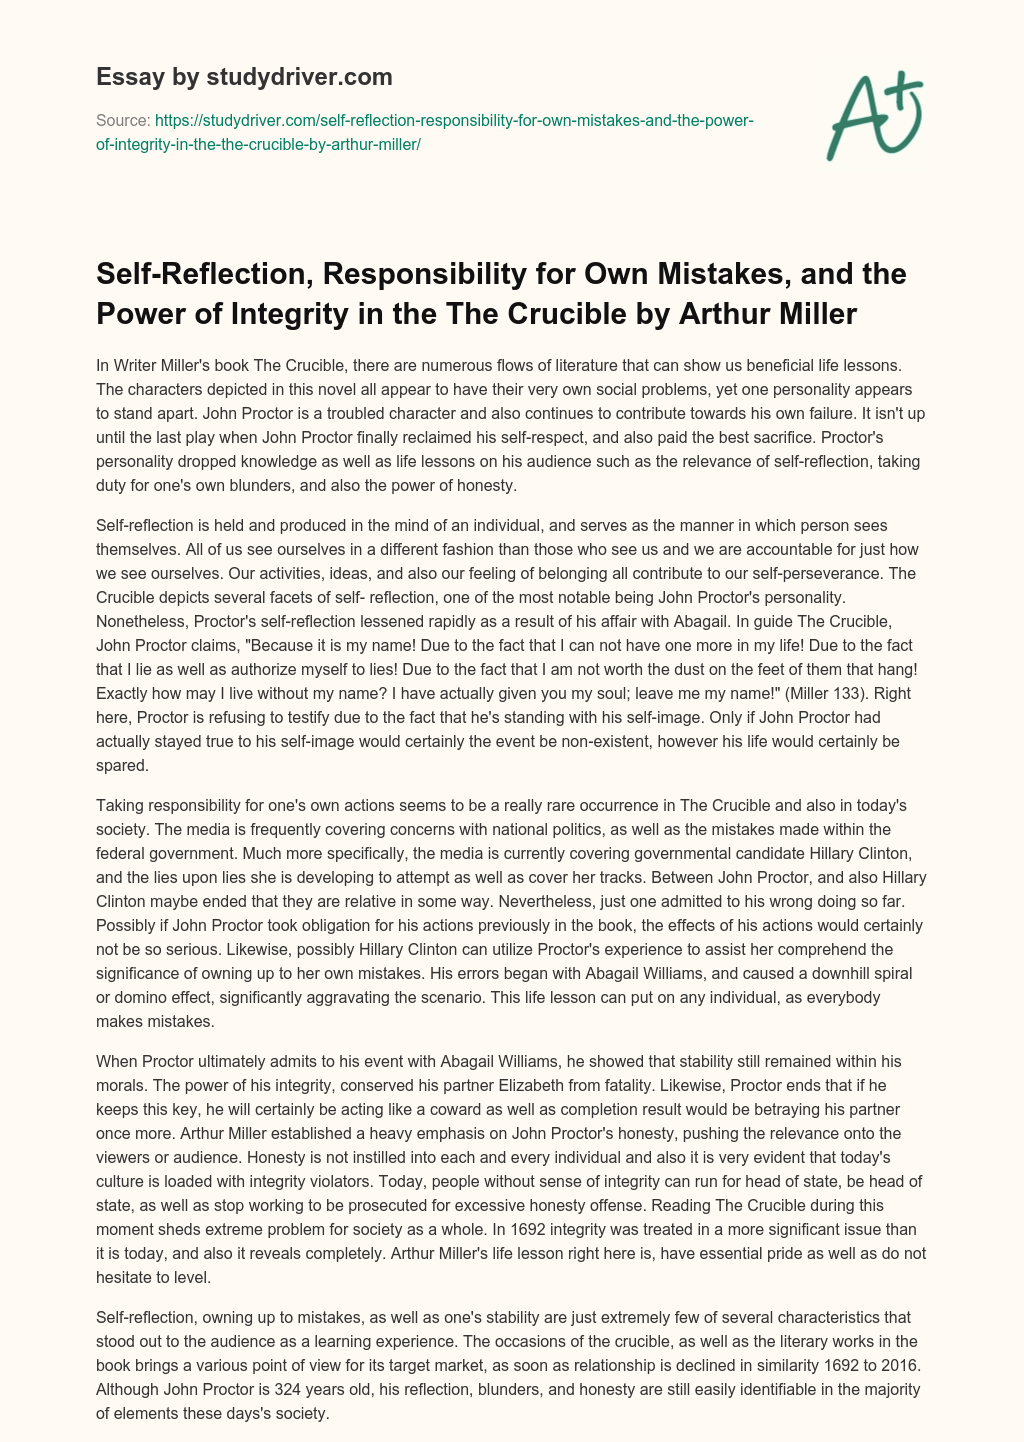 Self-Reflection, Responsibility for own Mistakes, and the Power of Integrity in the the Crucible by Arthur Miller essay